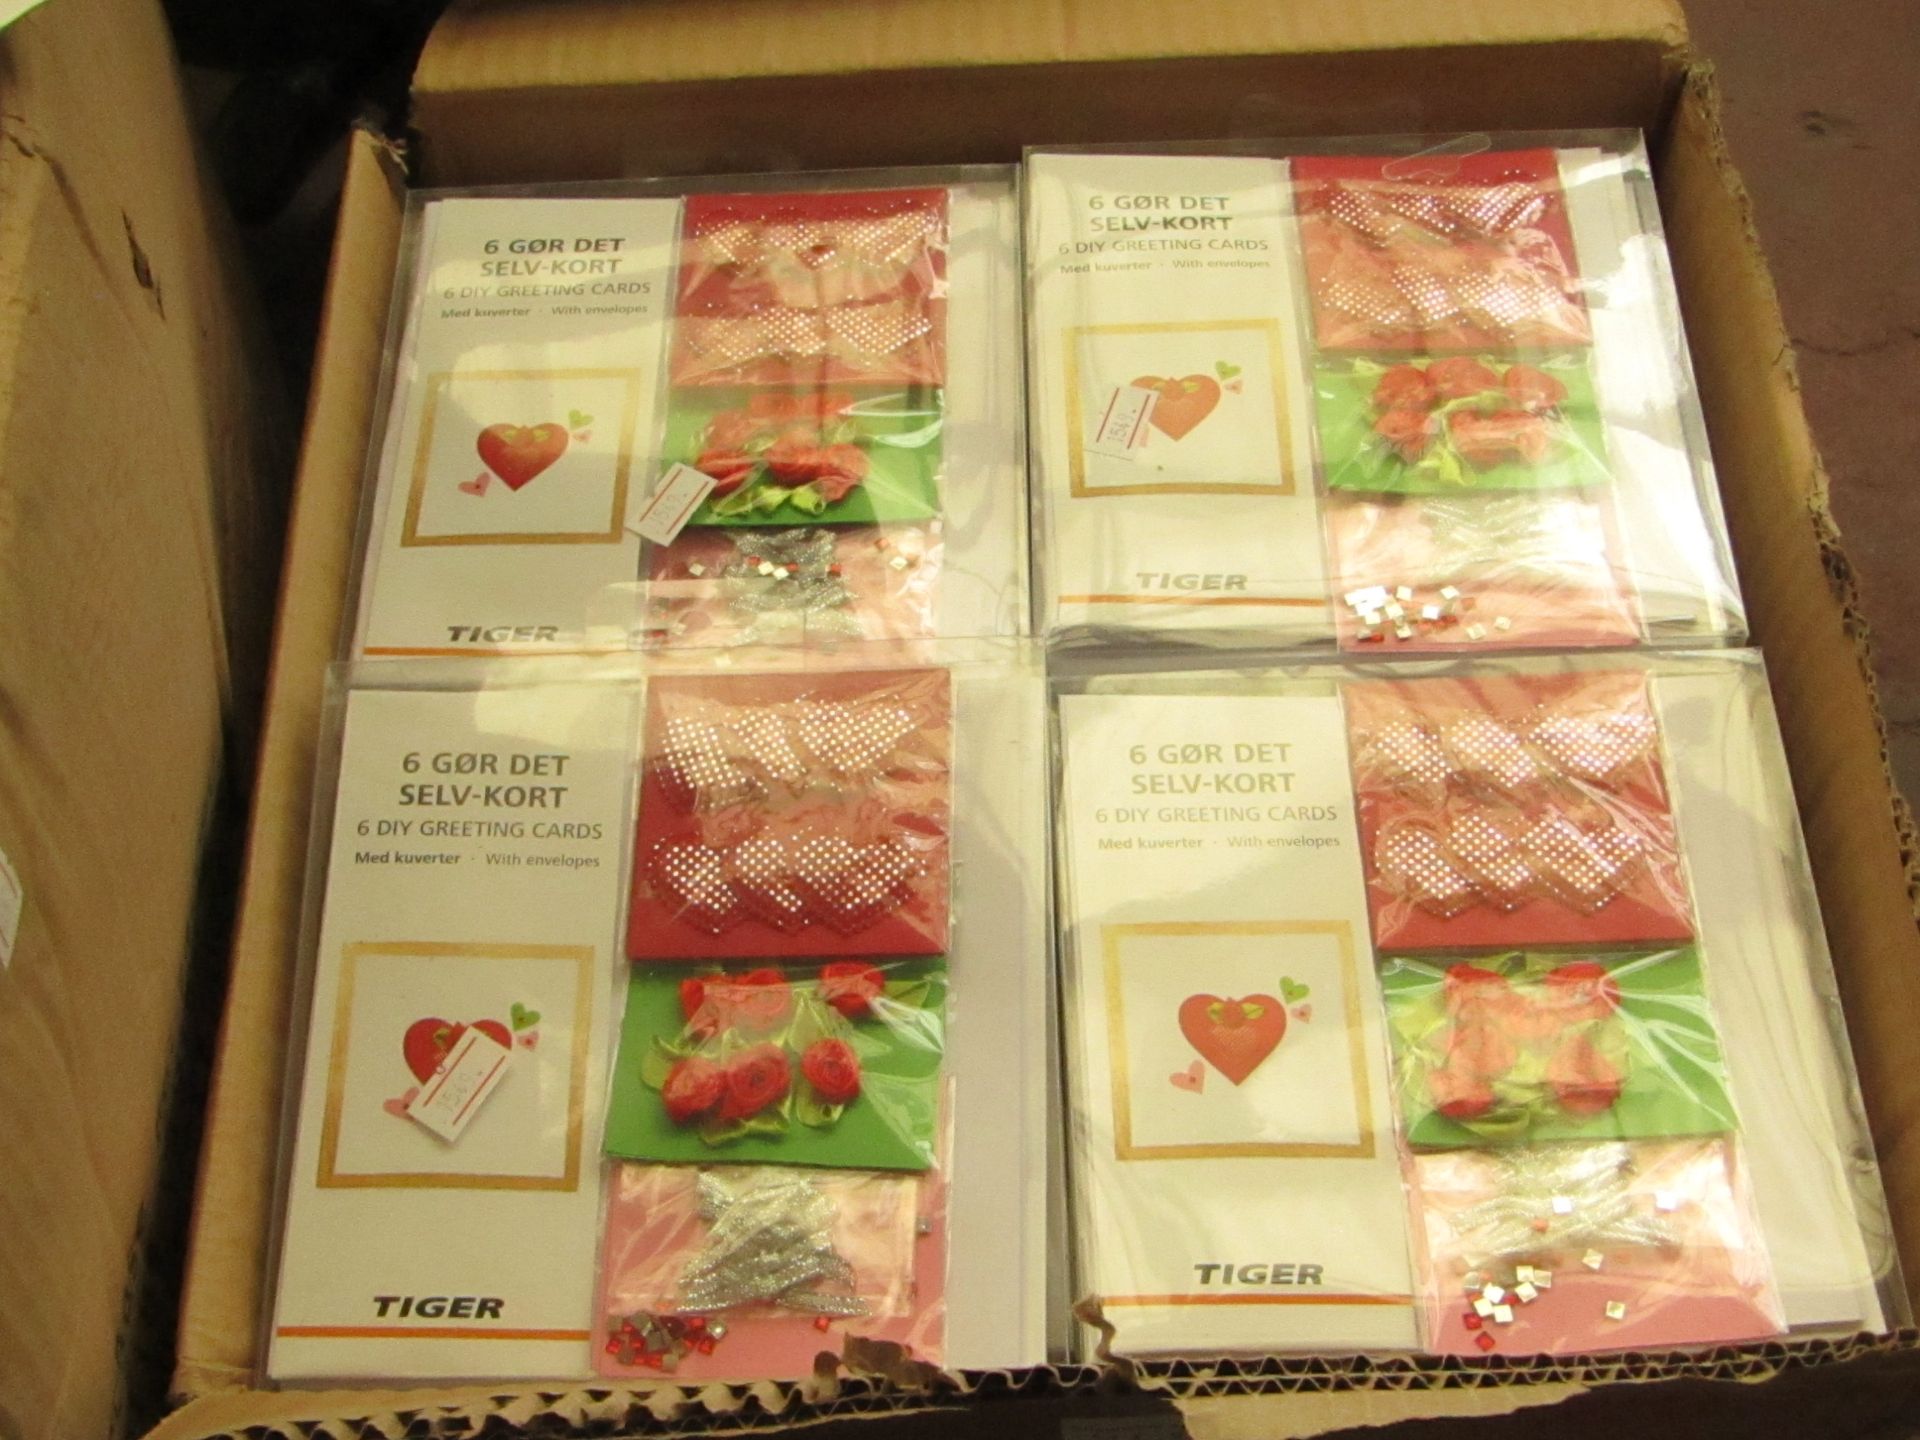 48 x 'Tiger' 6 DIY Greetings cards with envelopes.new in packaging